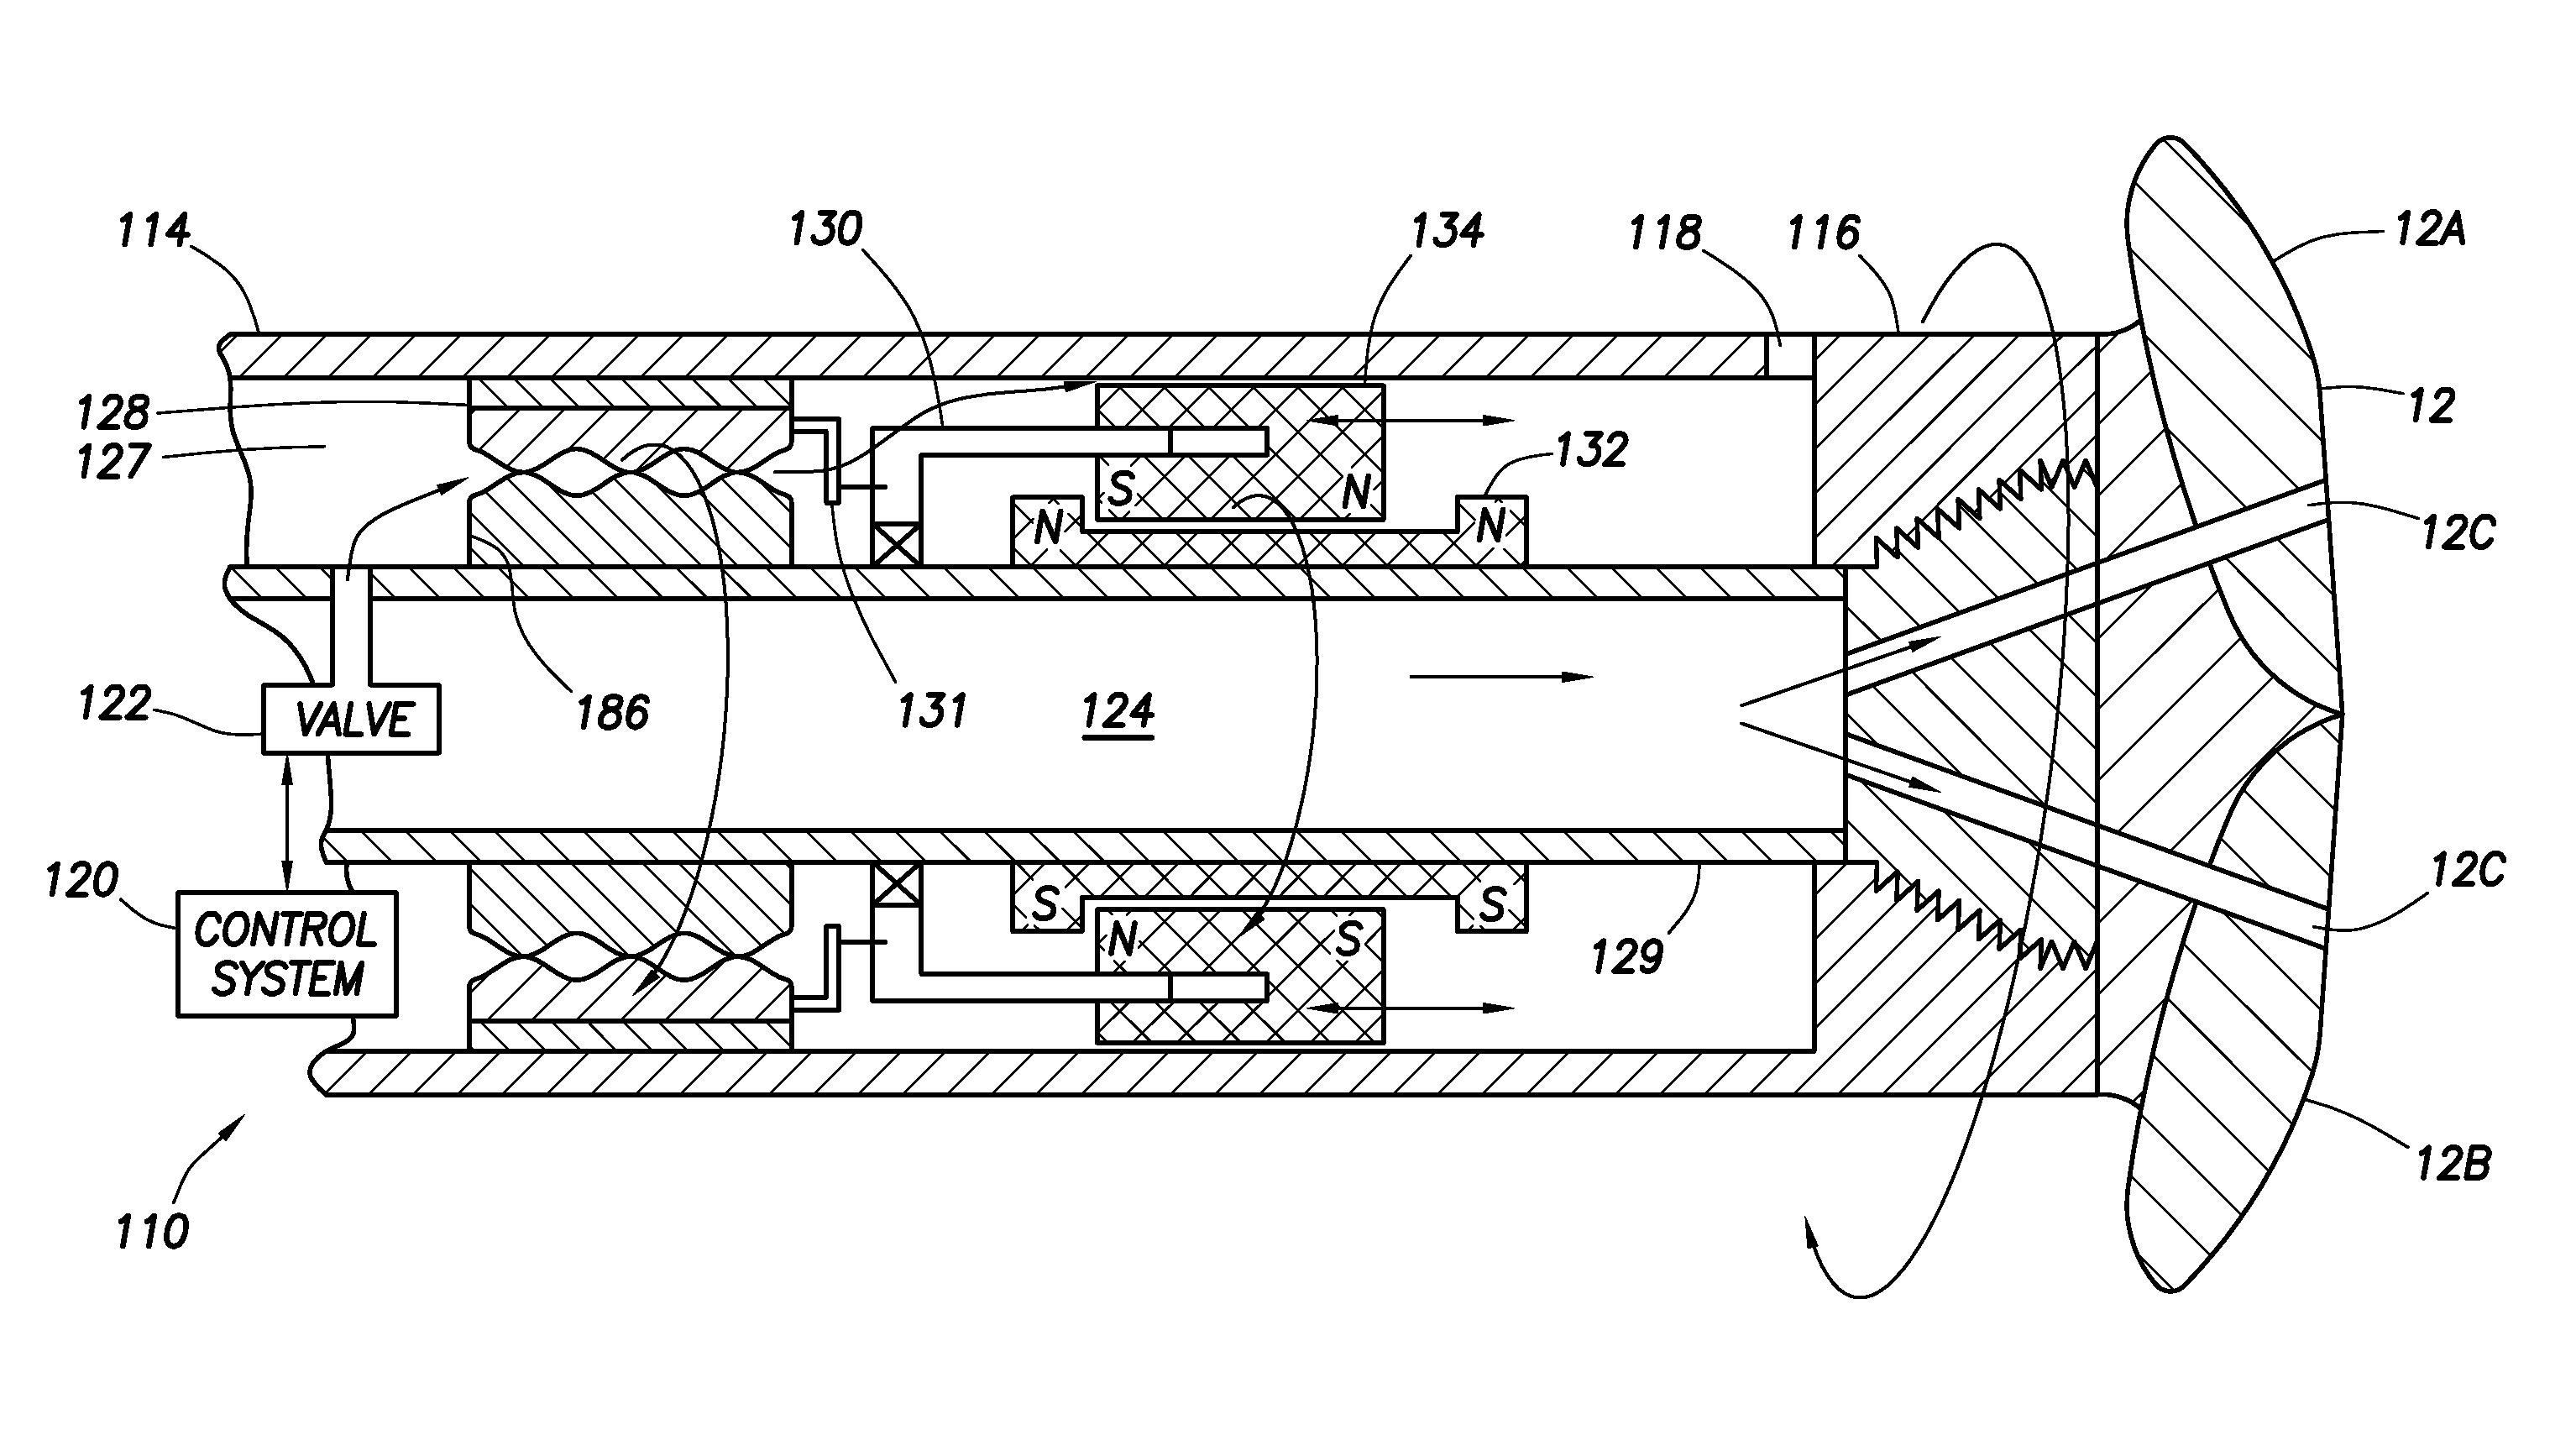 Wellbore instruments using magnetic motion converters